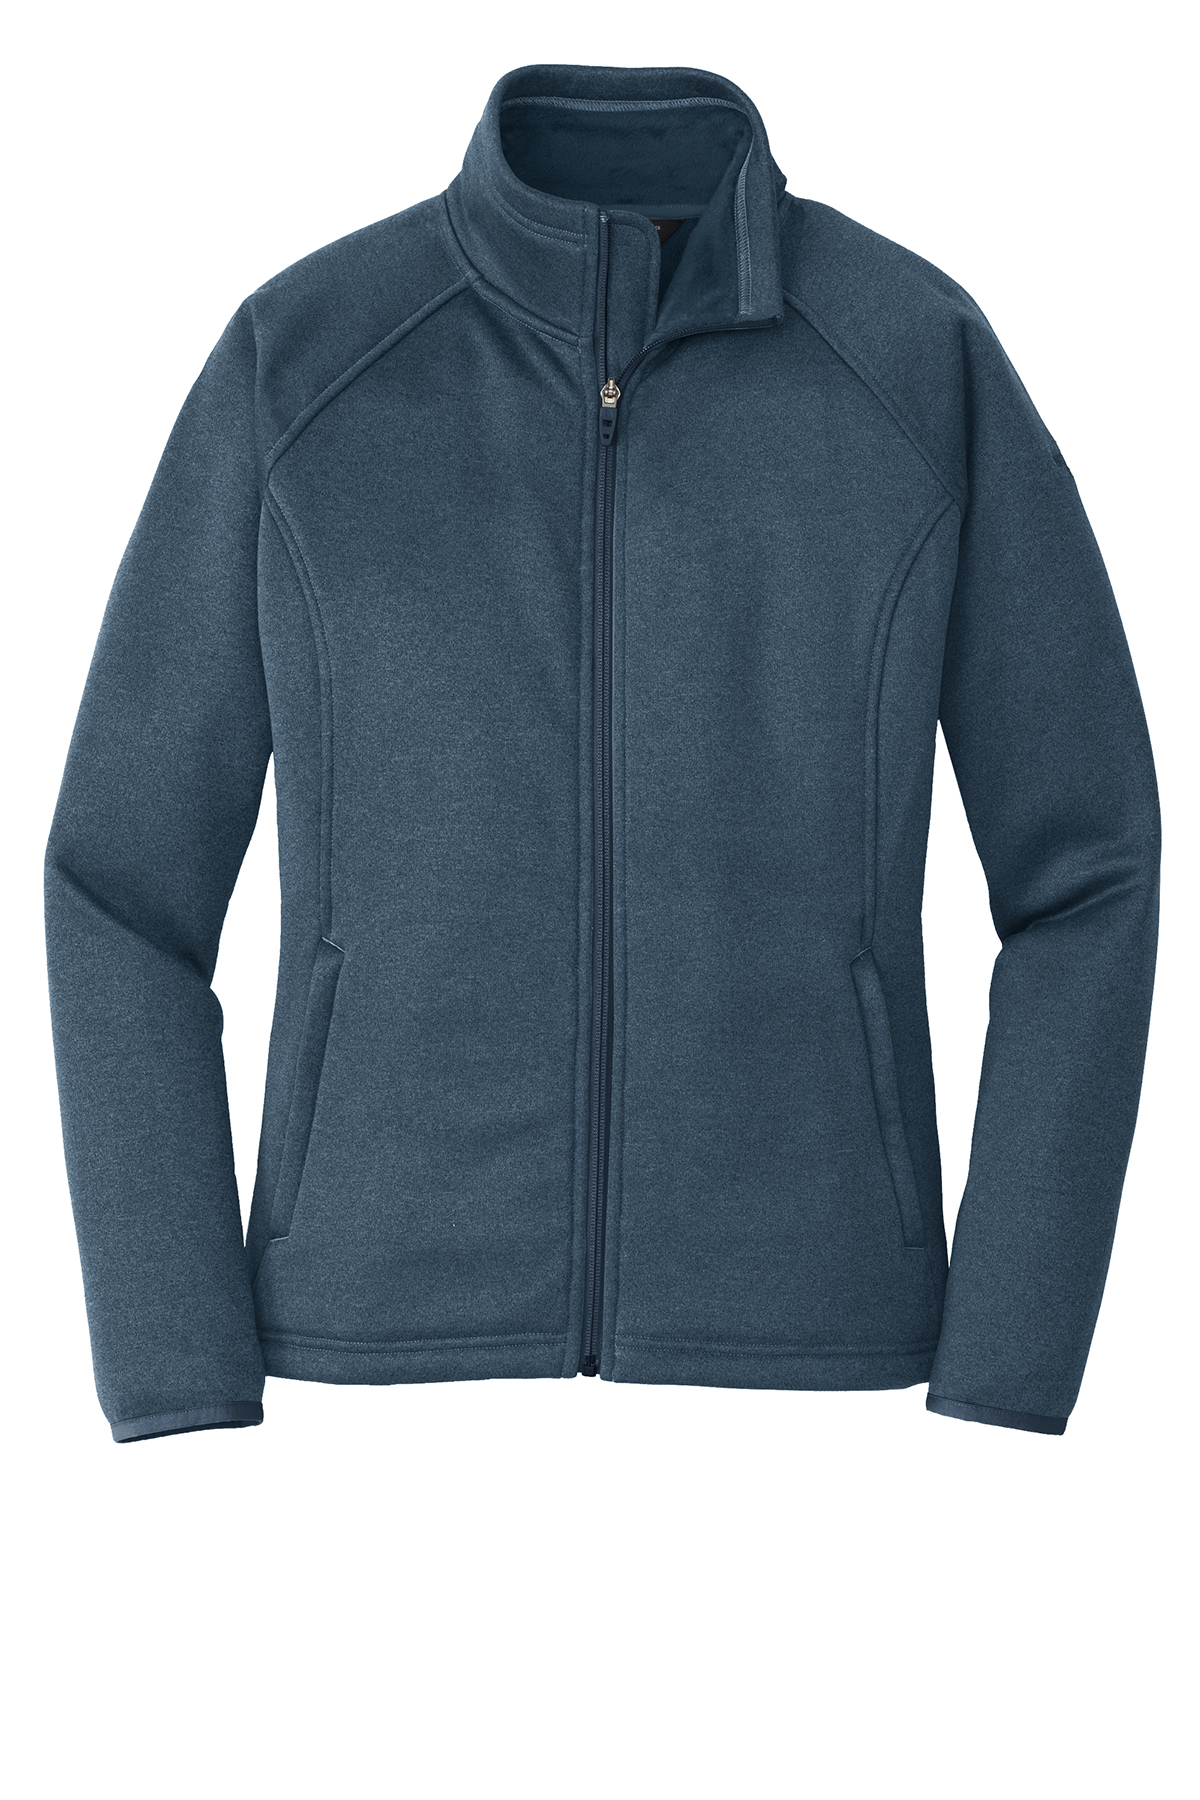 The North Face Ladies Canyon Flats Stretch Fleece Jacket | Product | SanMar